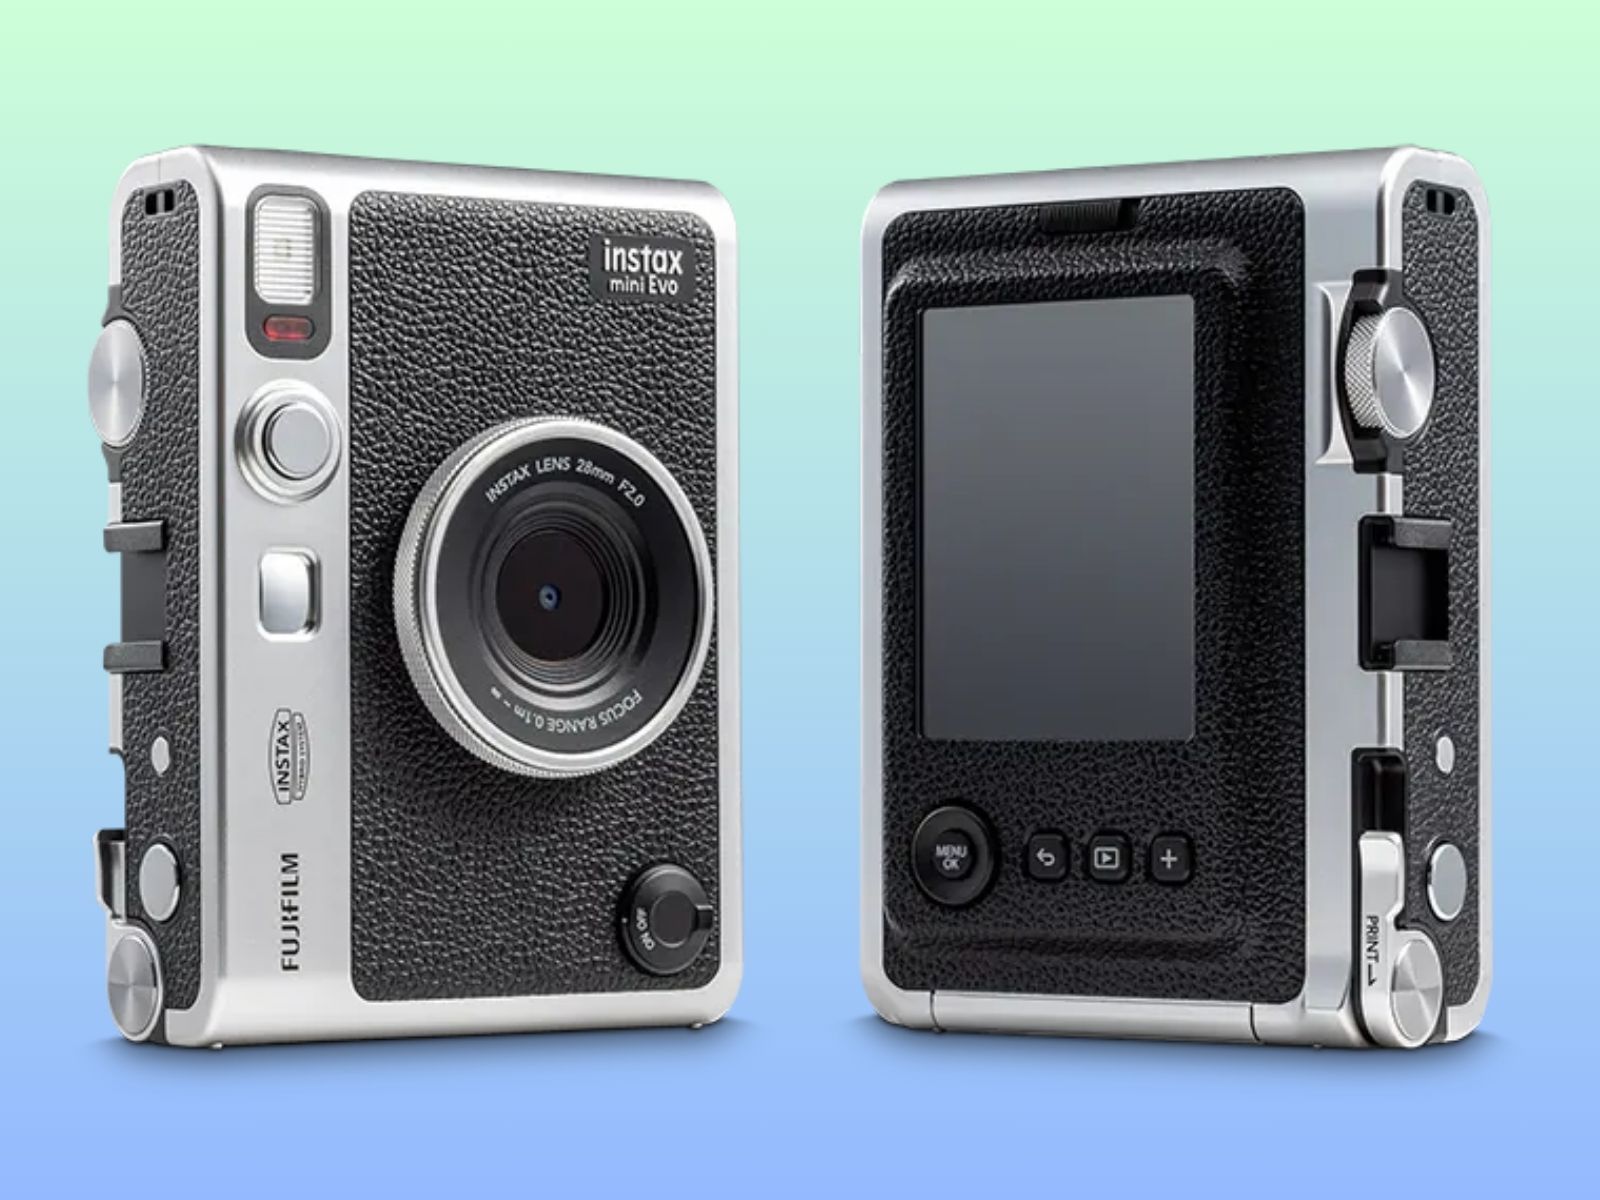 Fujifilm rumored to launch US$100 Instax hybrid camera this month -   News